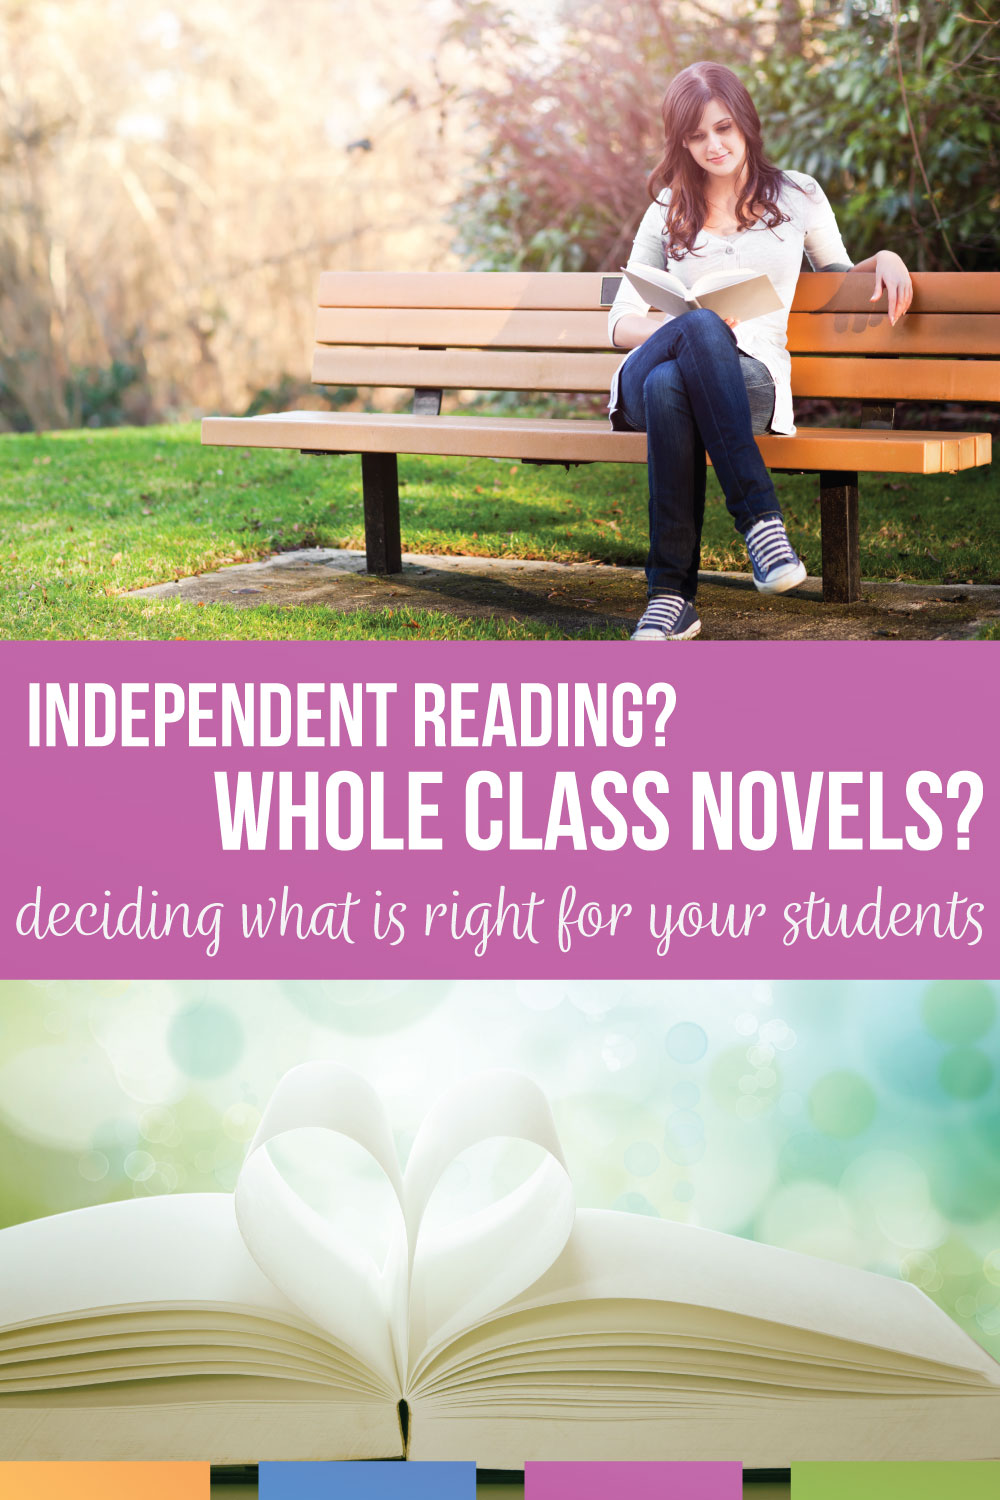 Independent reading and class novels do not need to be an all or nothing experience for high school English classes. Independent reading activities high school often work well with whole class novels. For a list of independent reading books for high school, think of engaging young adult literature & purposeful social discussions. Benefits of whole class novels & novels read in high school can work together as secondary English teachers encourage reading with high school language arts students.